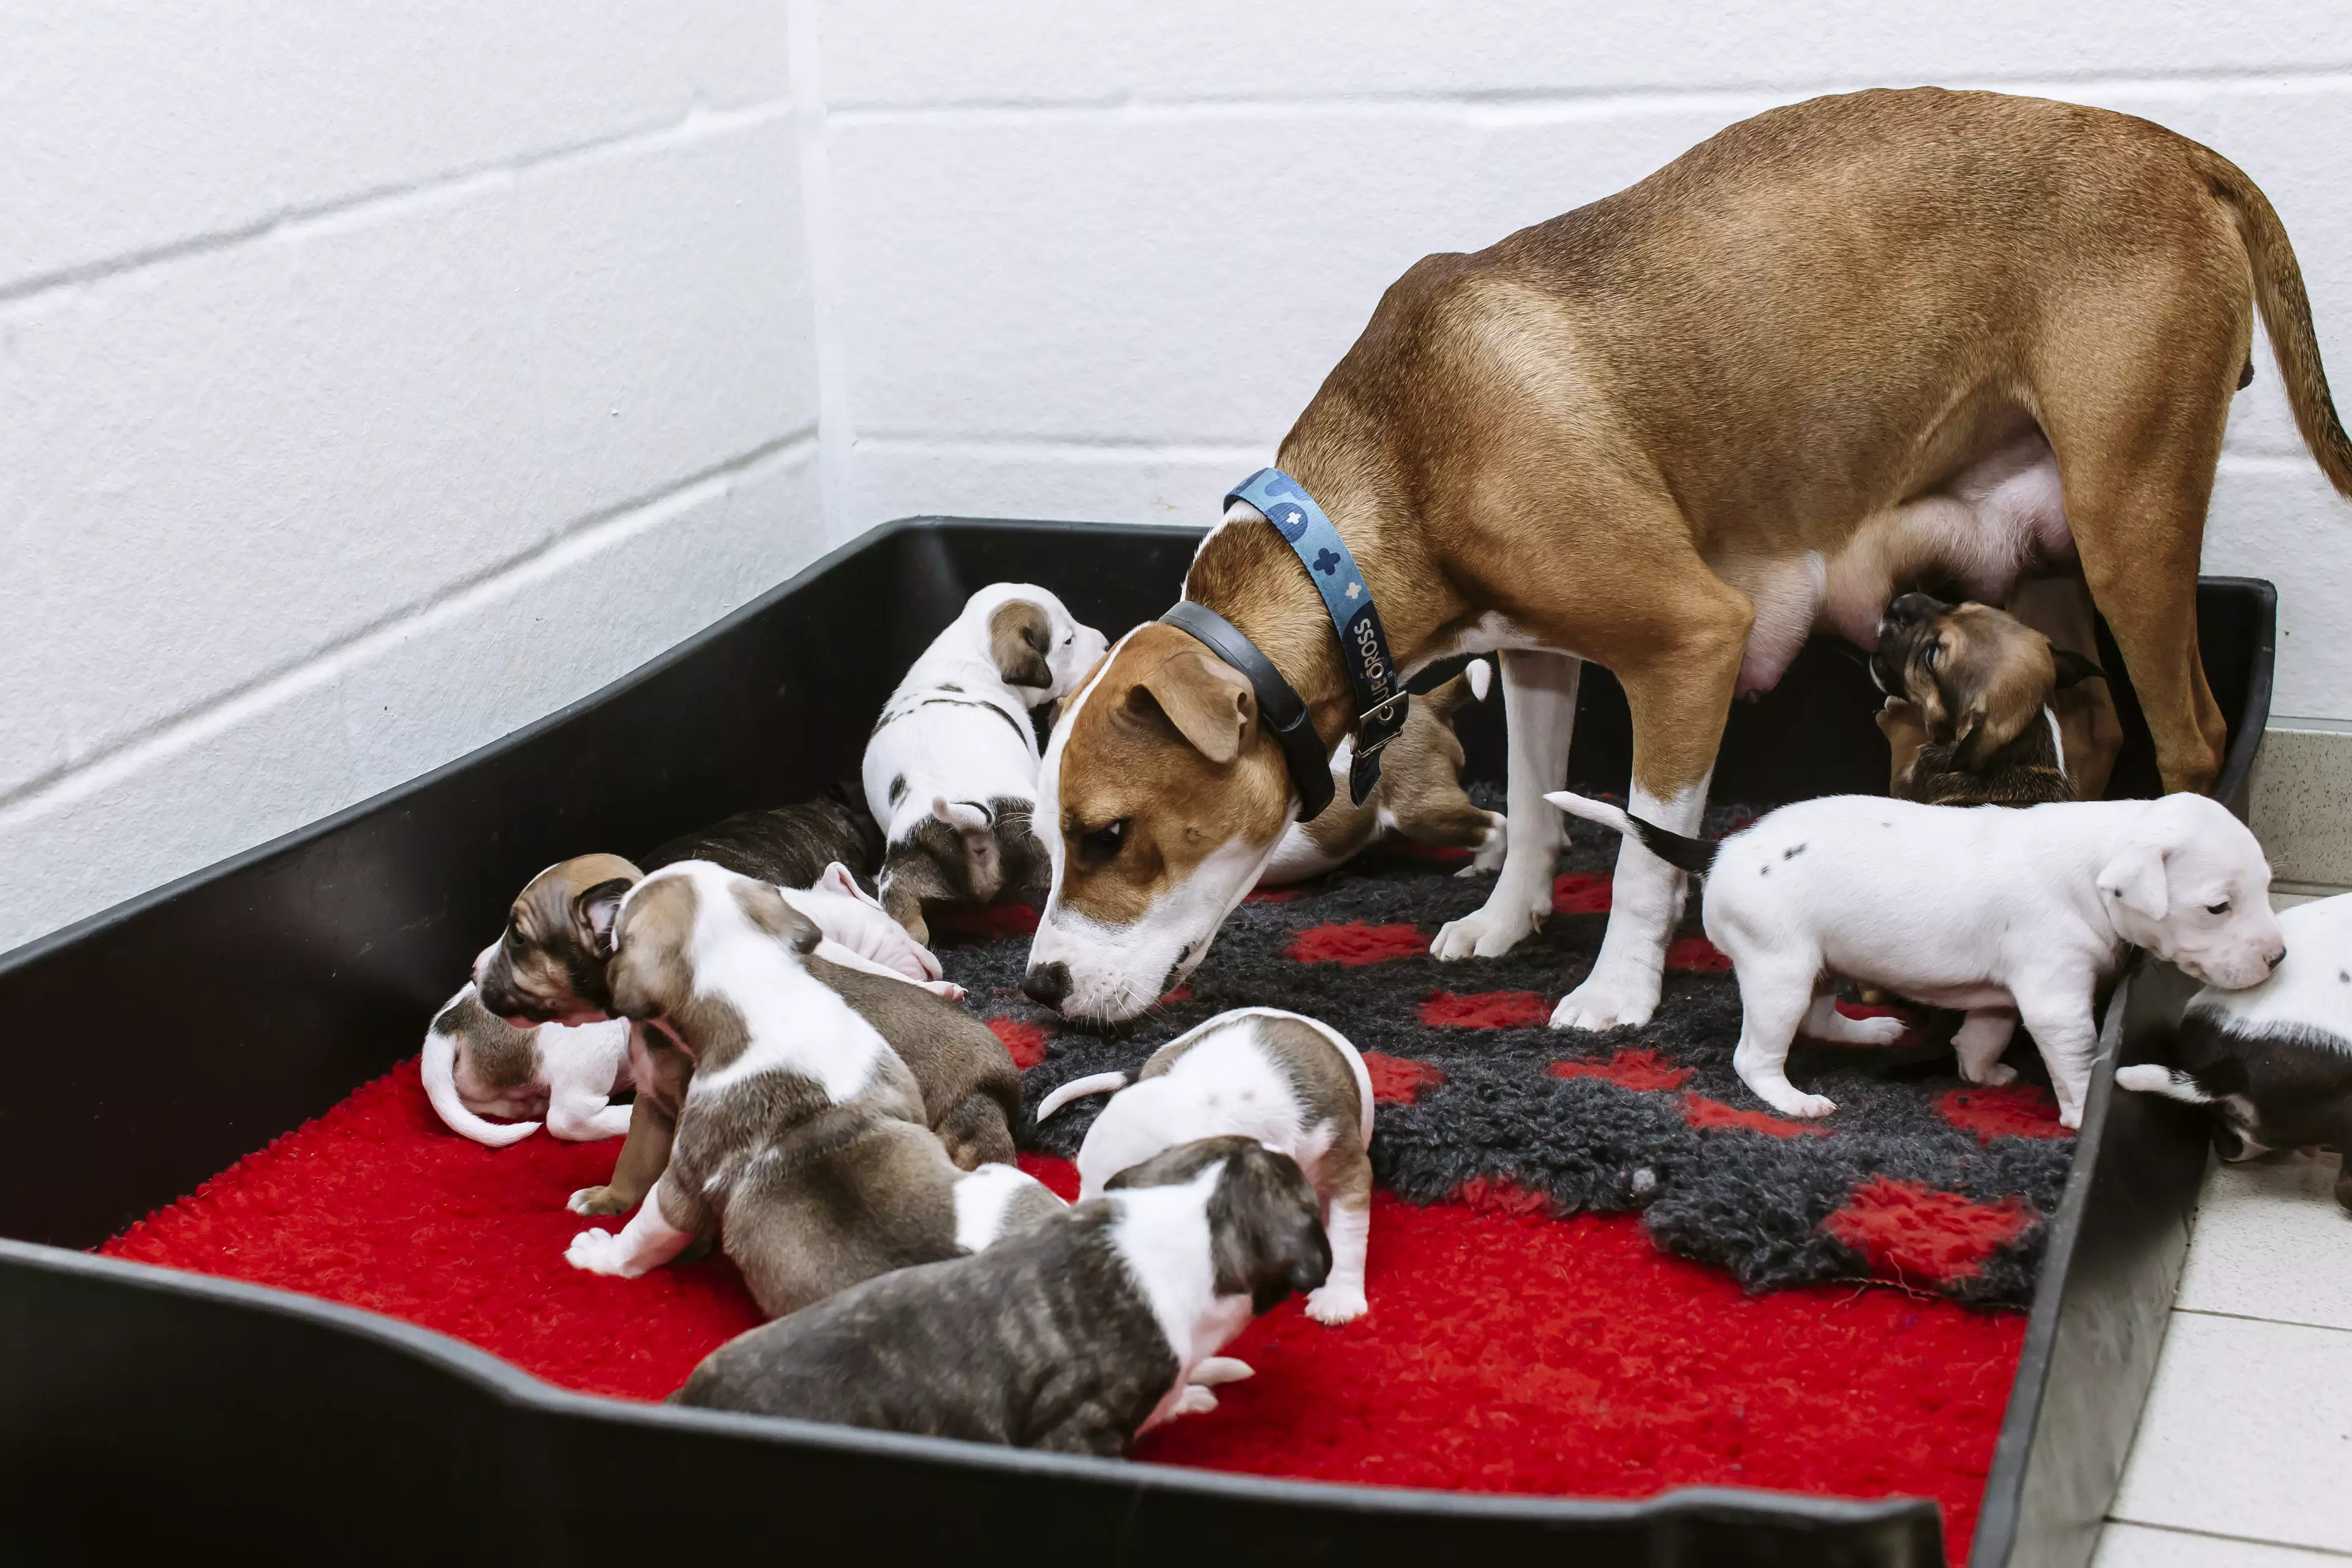 Darla gave birth to a litter of 12 in the Blue Cross animal centre (